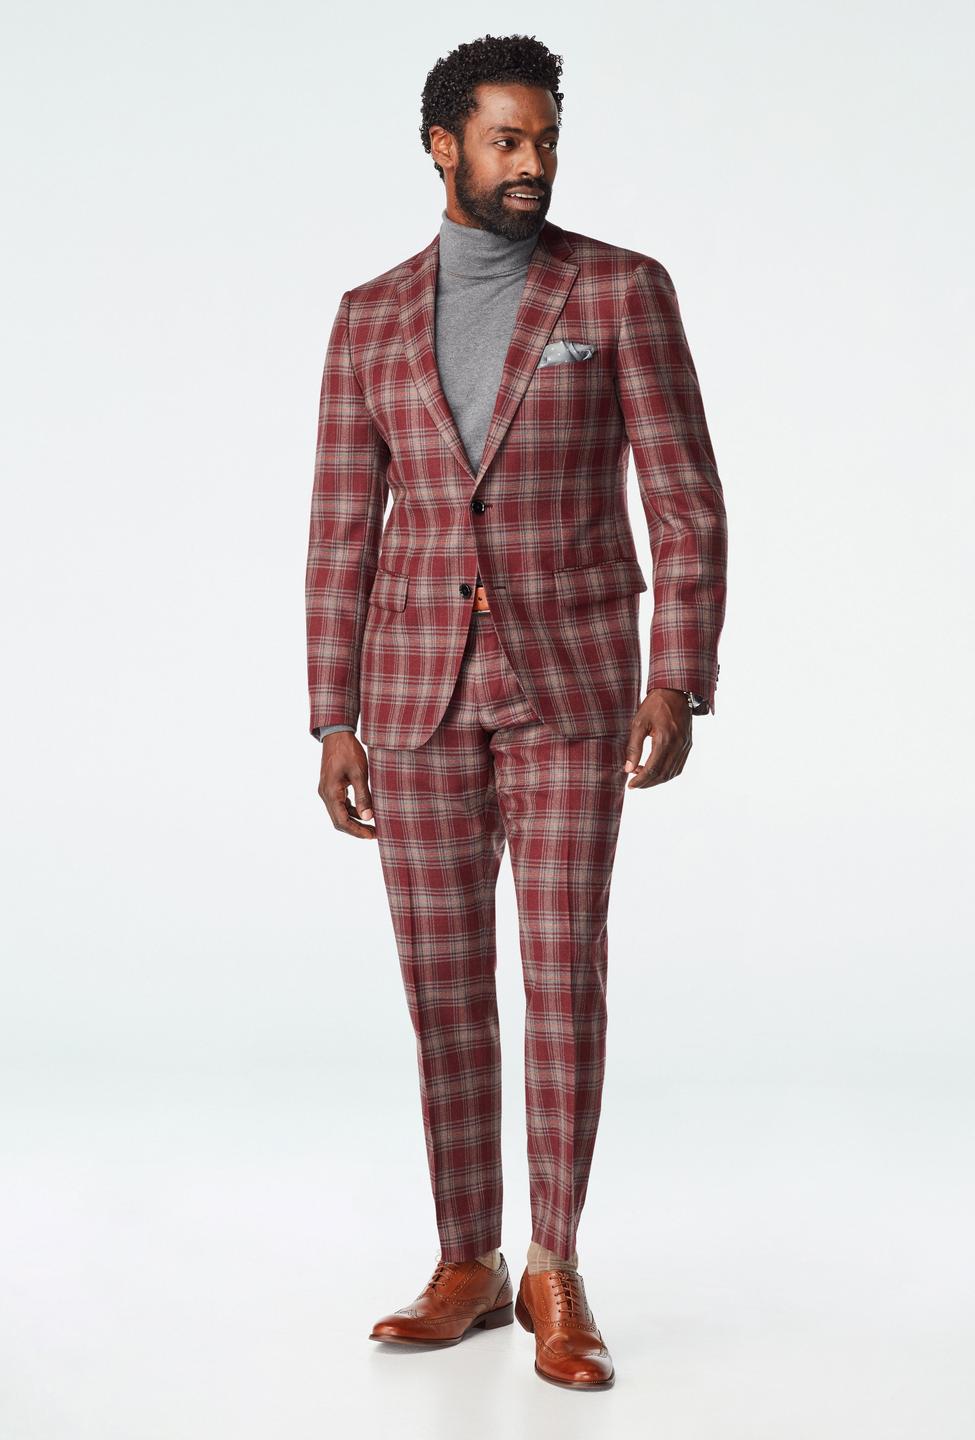 Red suit - Danhill Plaid Design from Seasonal Indochino Collection